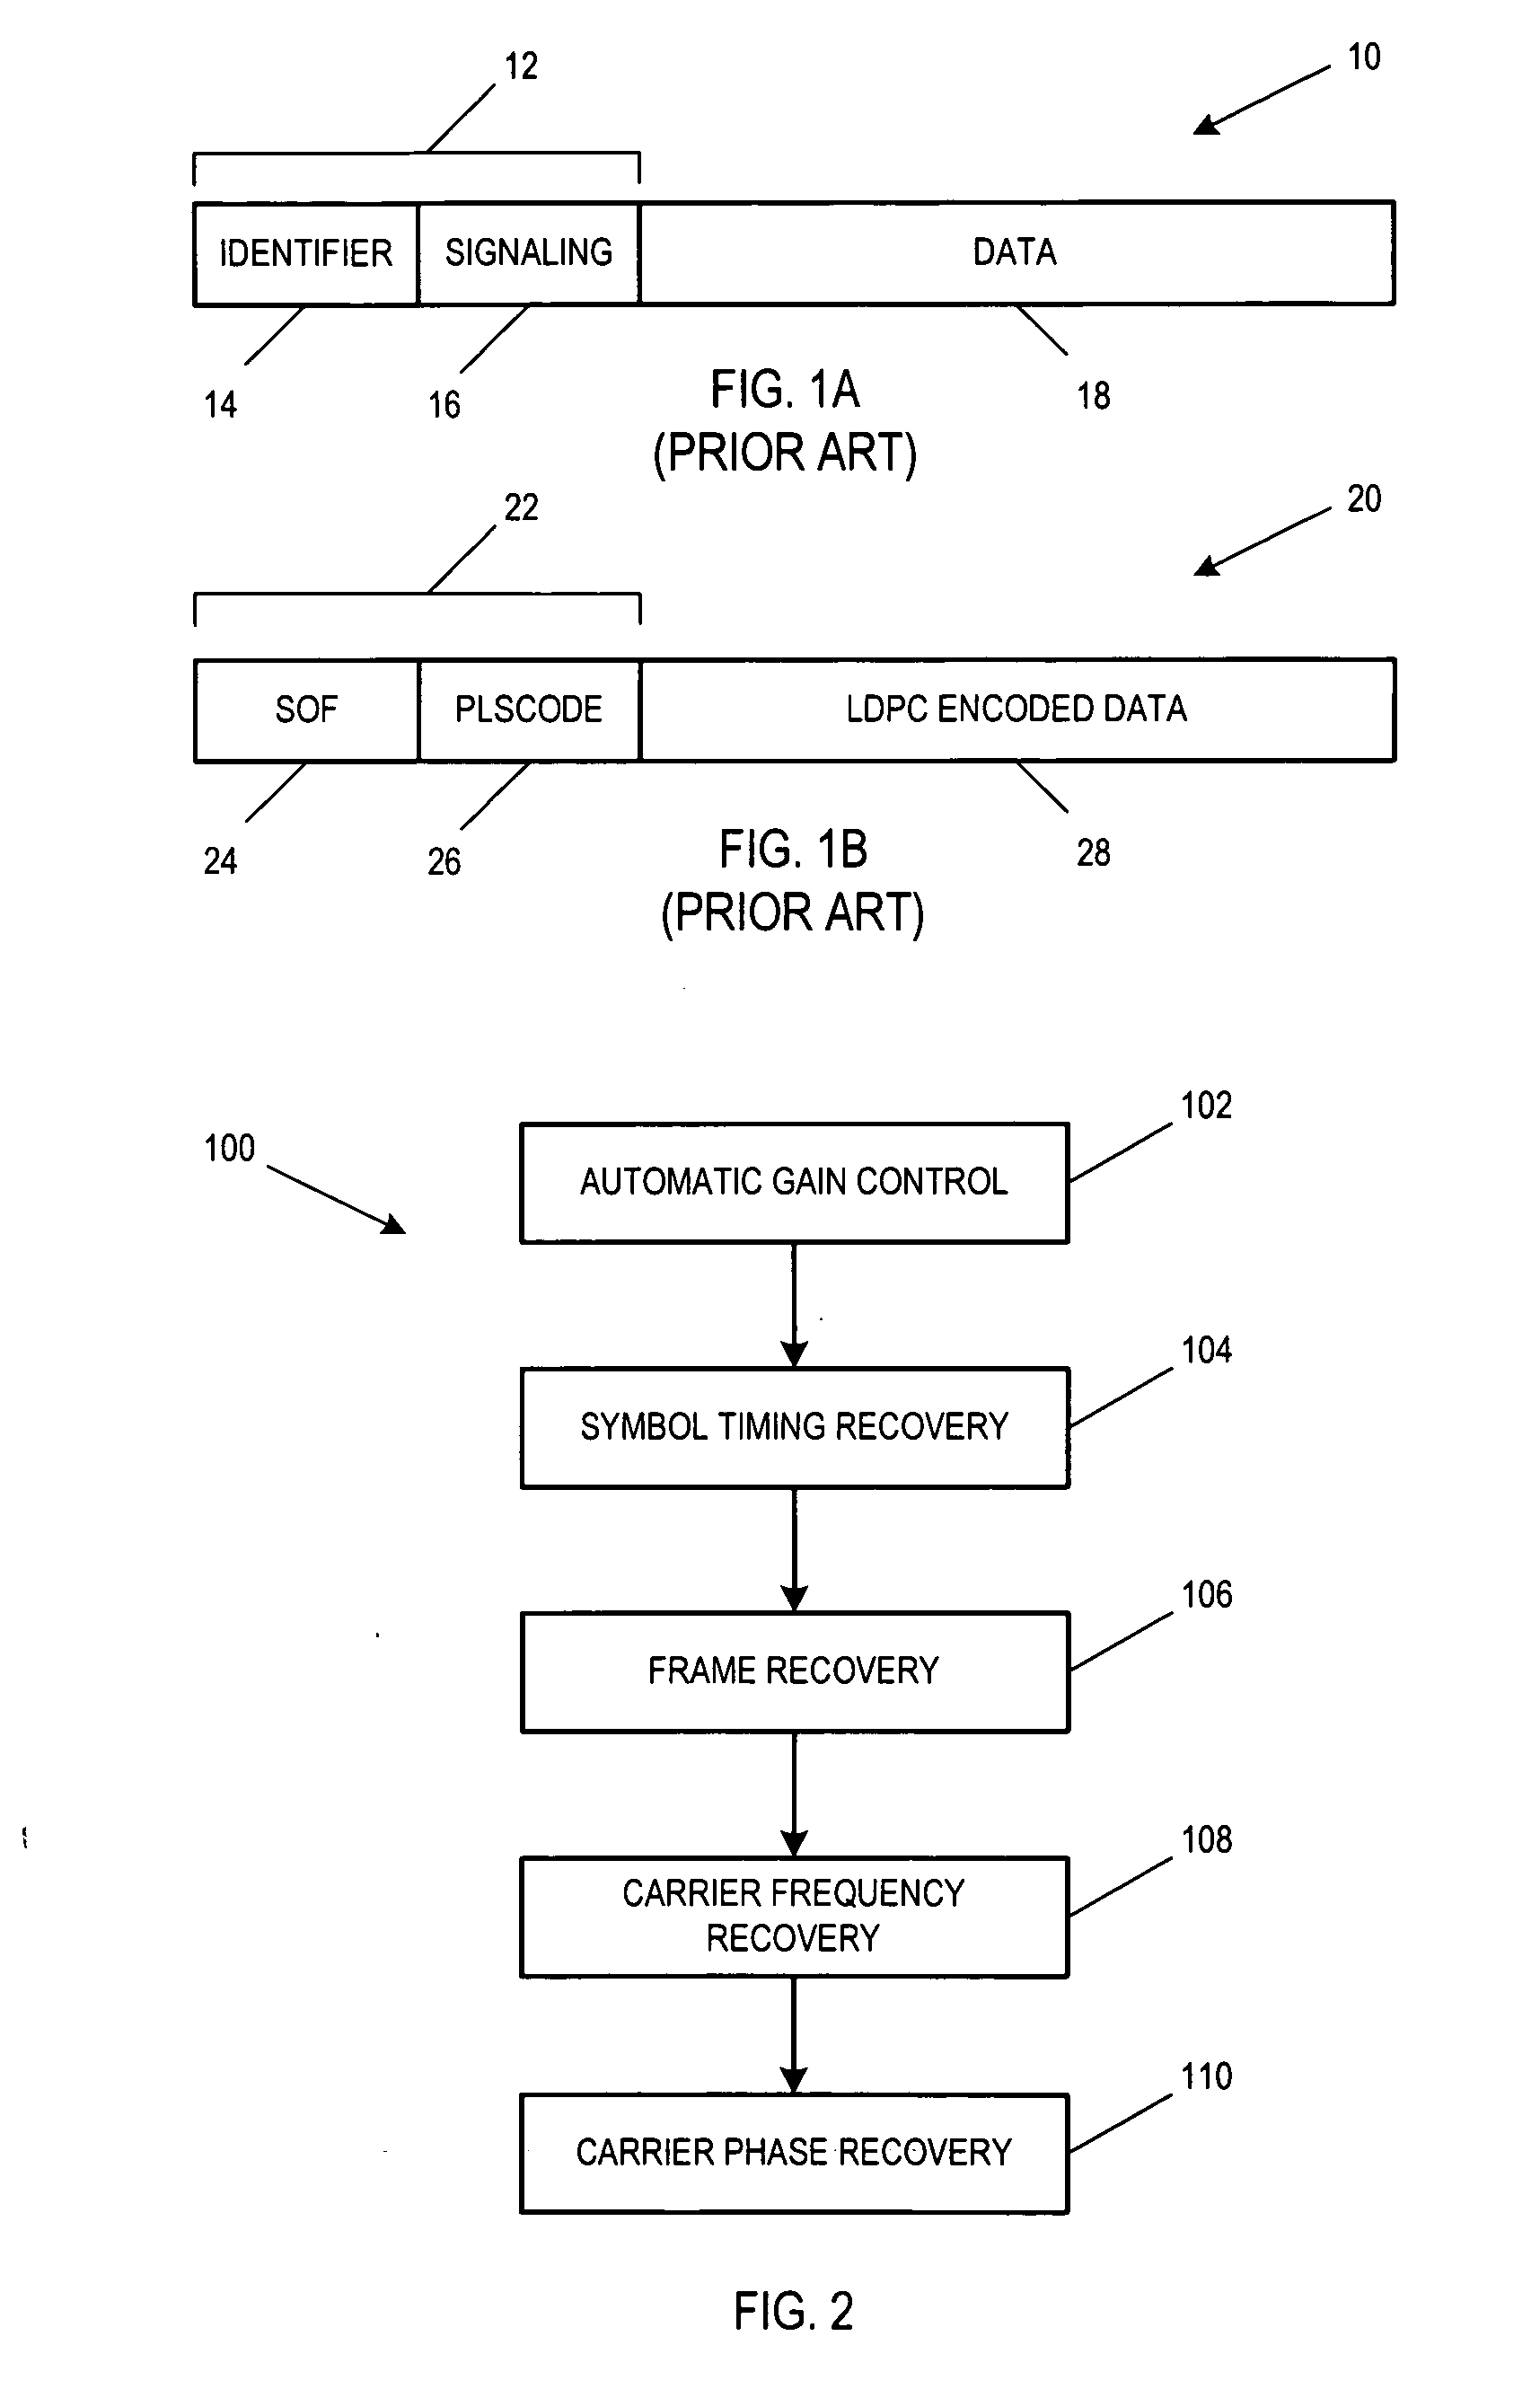 Frame-based carrier frequency and phase recovery system and method